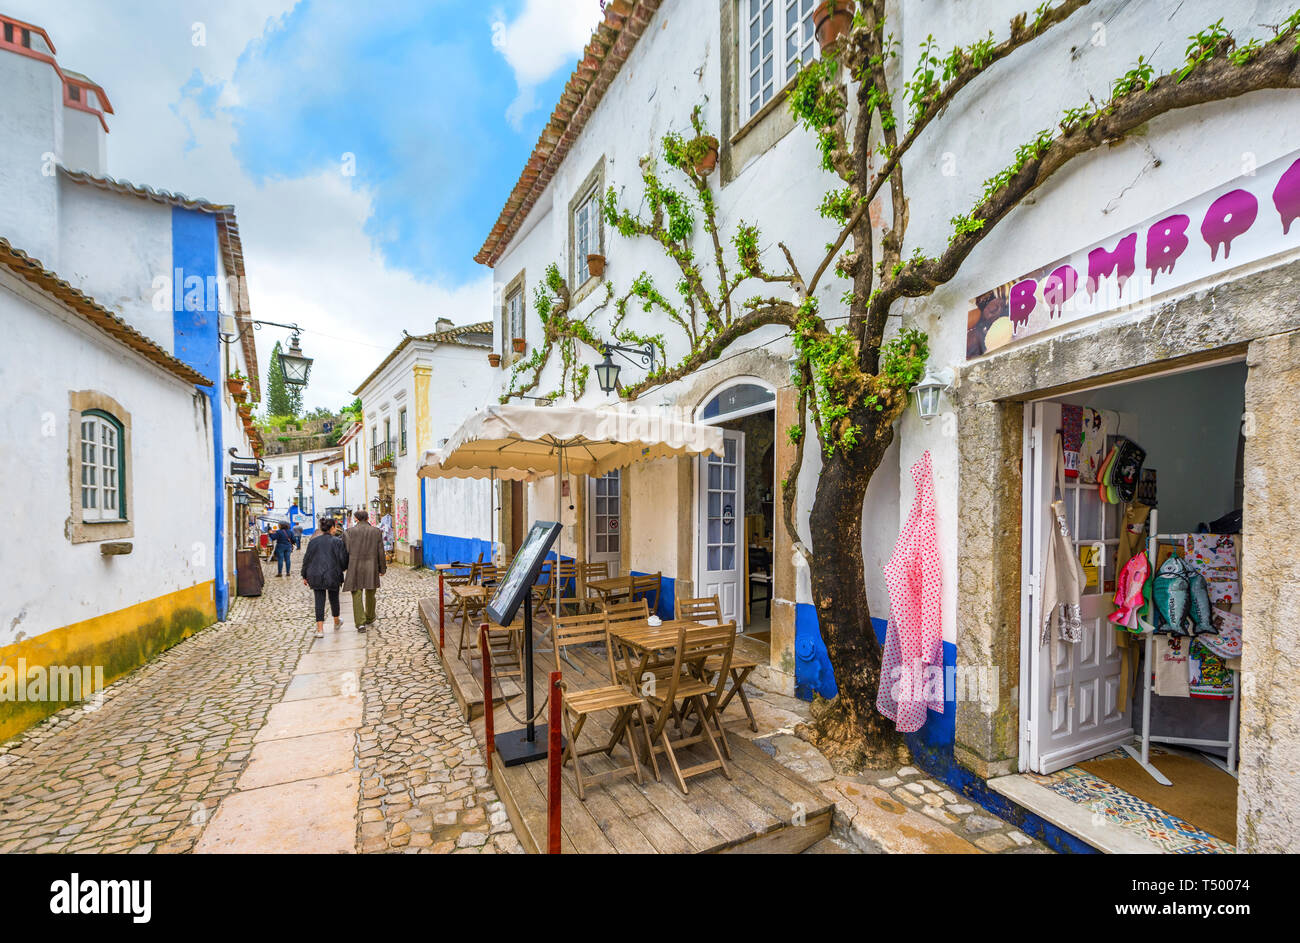 At The Old Streets Of Obidos Portugal Stock Photo Alamy